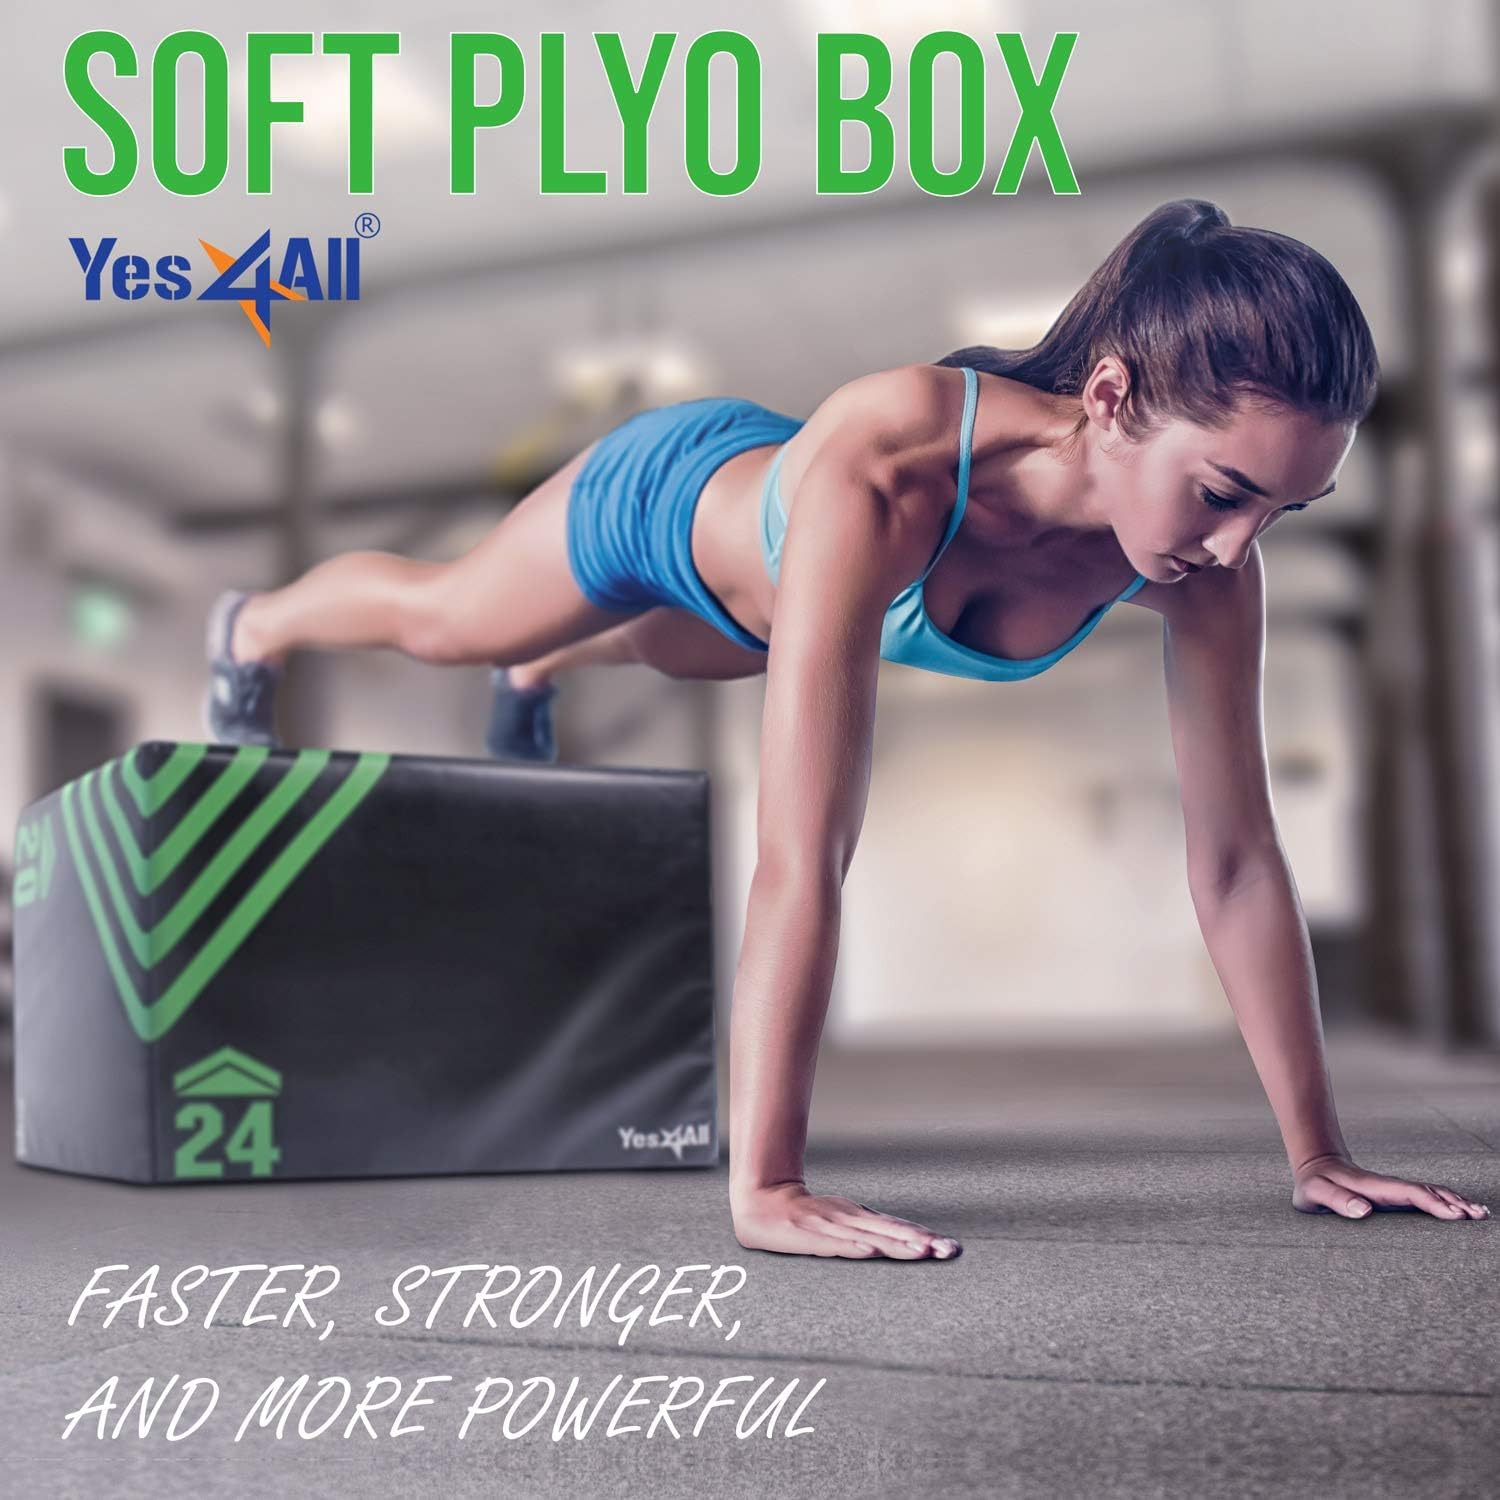 Yes4All 3 in 1 Foam Plyometric Jump Box Jump Training & Conditioning-Plyo Jump Box for Jump Training Fitness Workout Exercise